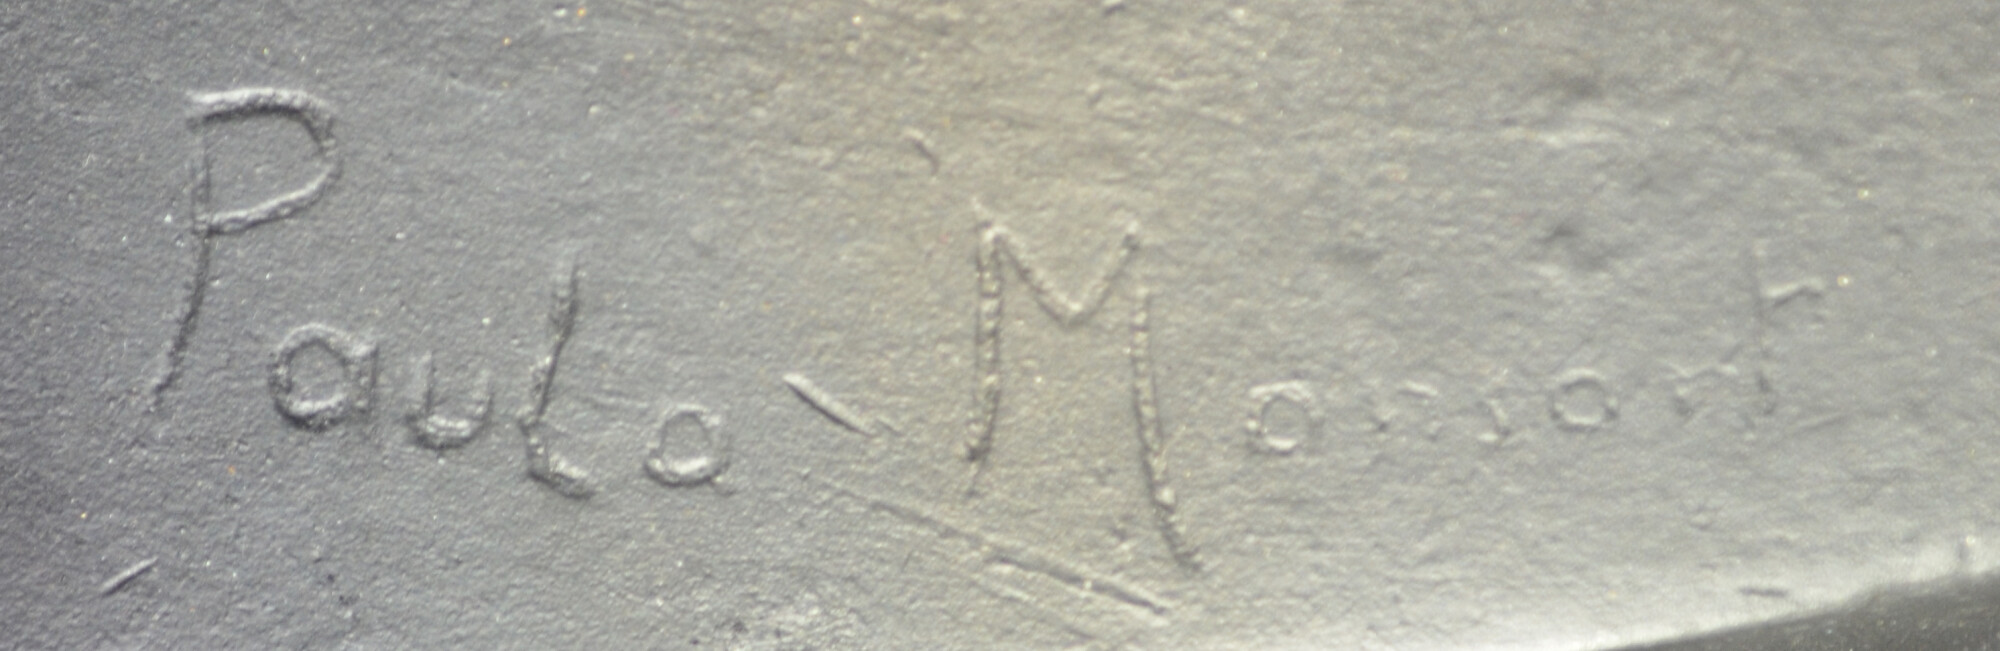 Paula Monsart  — Signature of the artist on top of the base